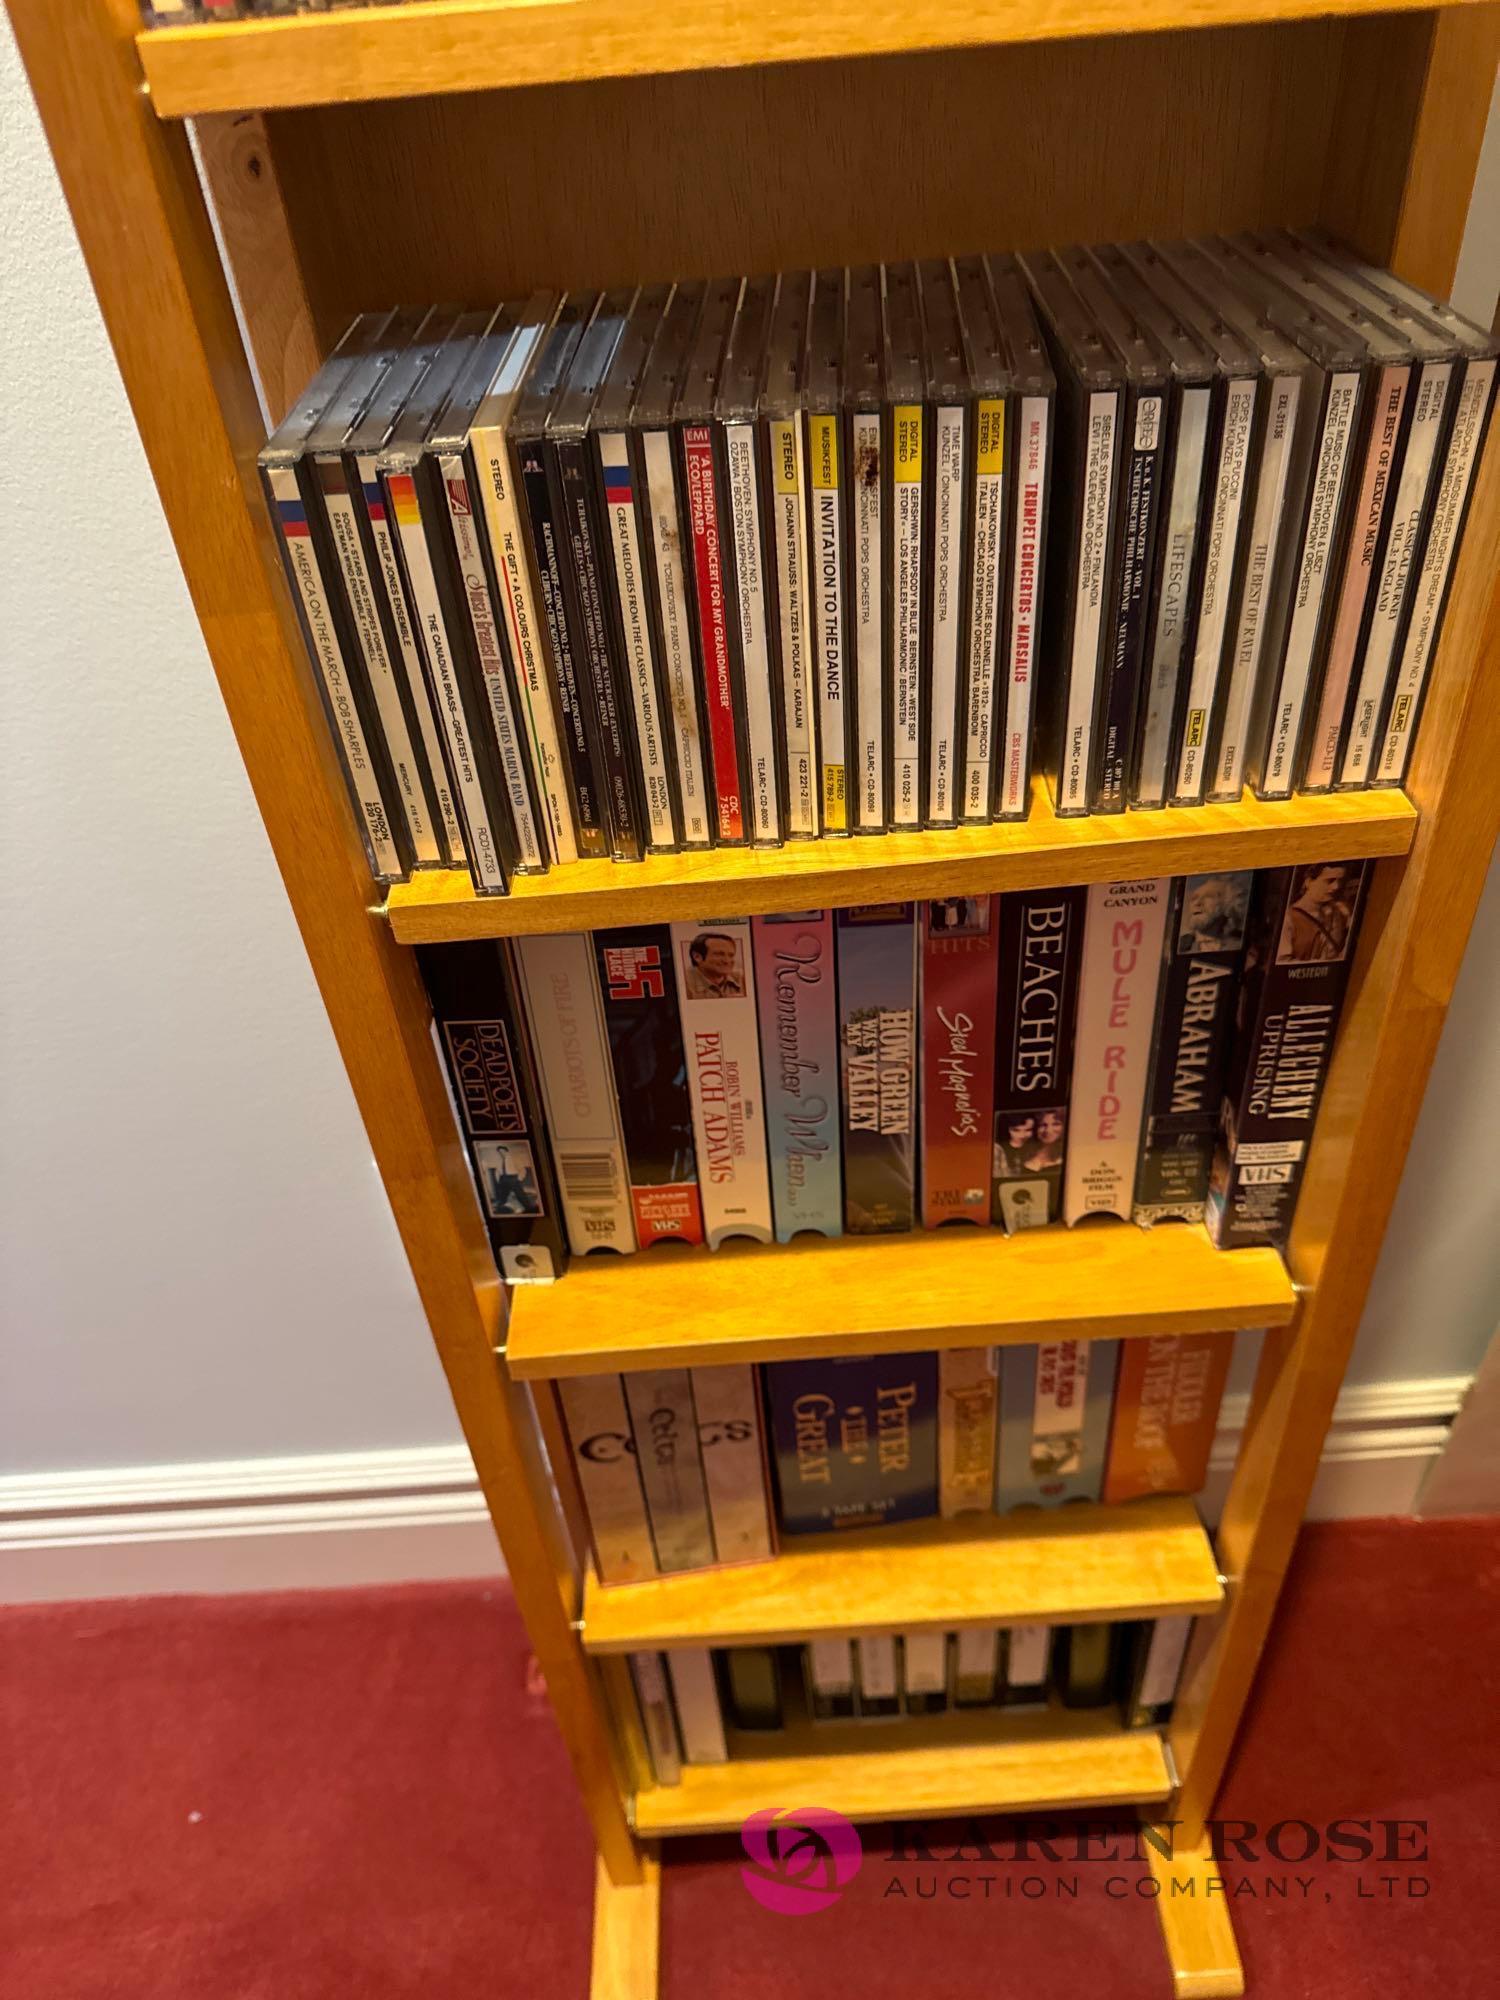 upstairs complete collection, DVDs, and VHS